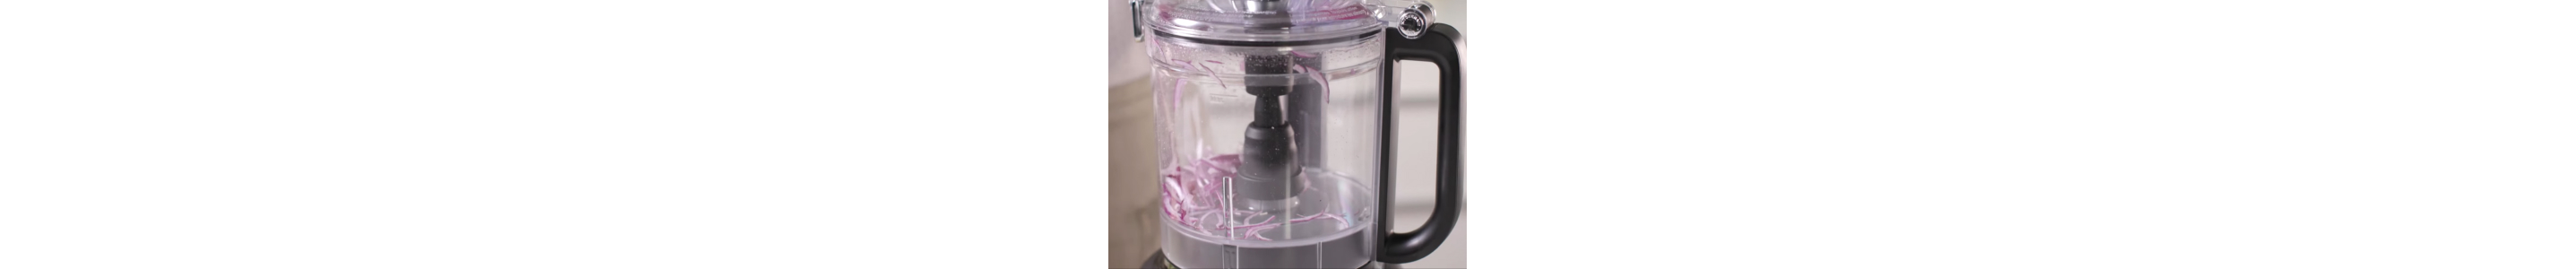 How to Chop, Dice, Slice and Mince Onions in a Food Processor | KitchenAid